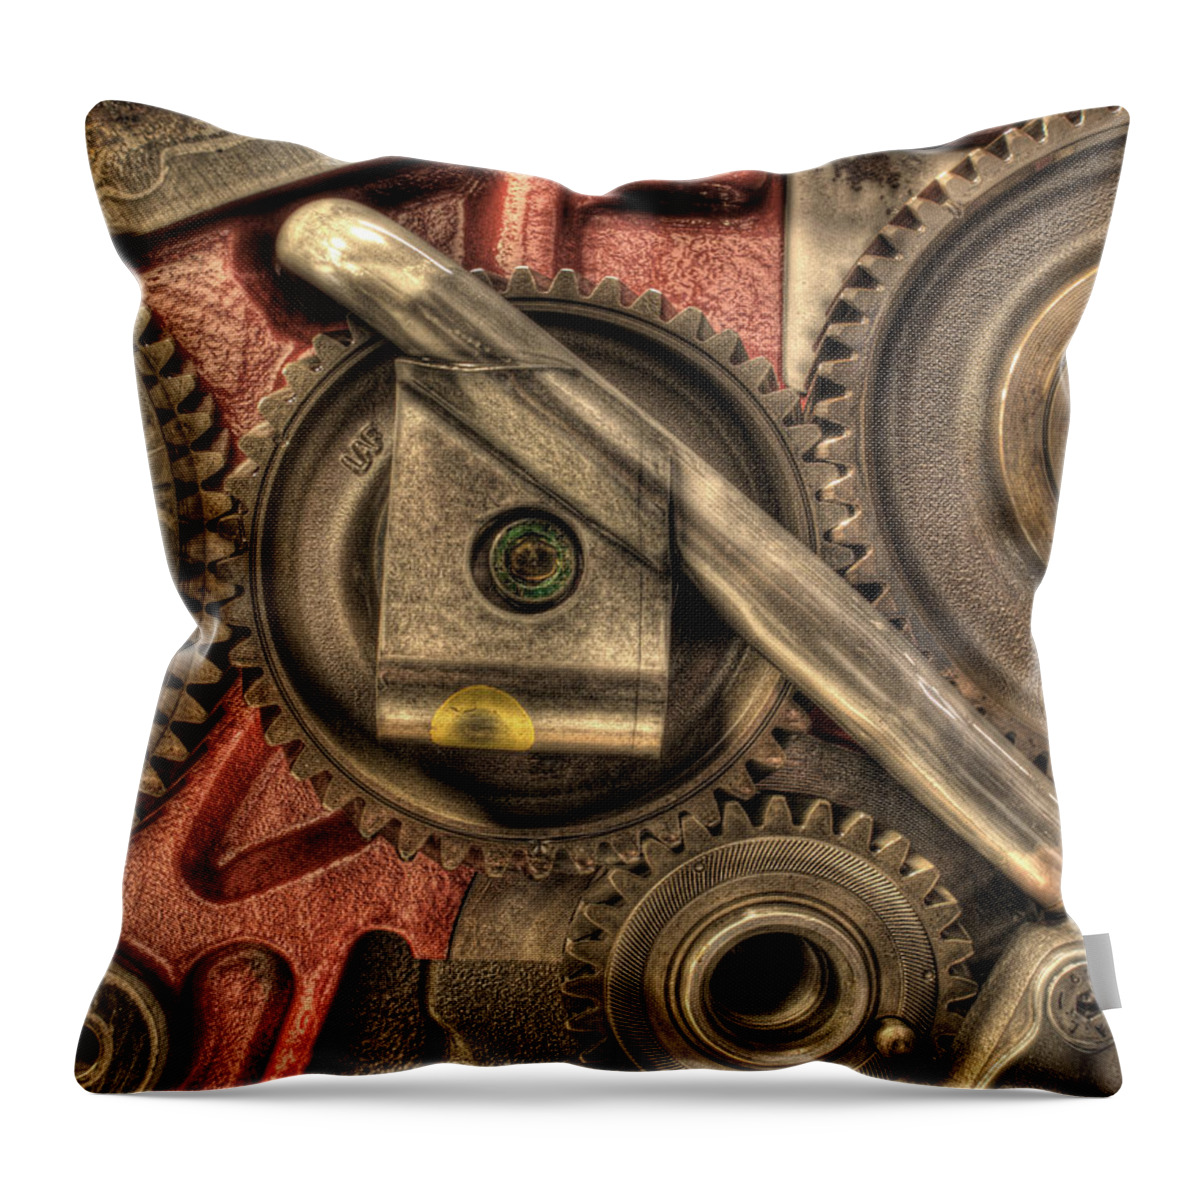 The Heart Of The Beast Throw Pillow featuring the photograph The Heart of the Beast by William Fields